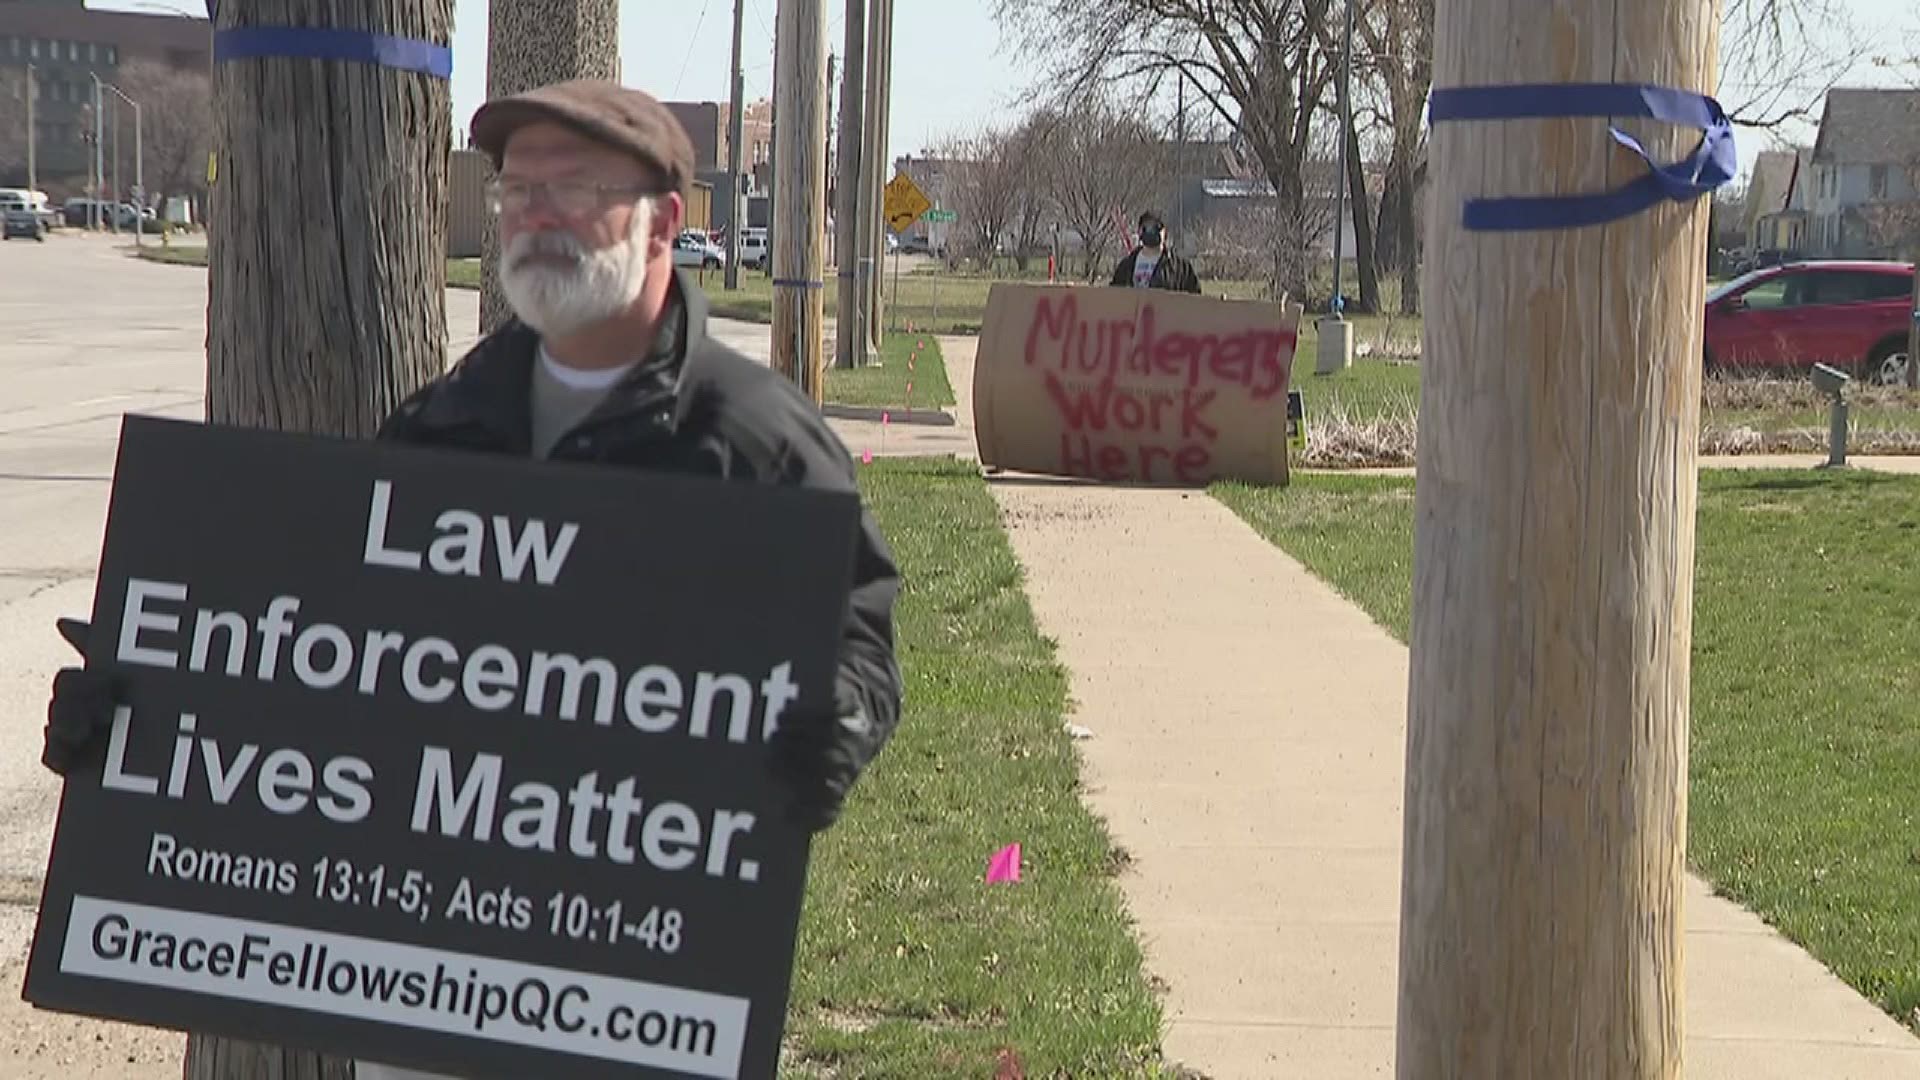 An officer involved shooting on April 1 left one man dead. The next day, two lone protesters met outside of the Rock Island Police Department with opposing messages.